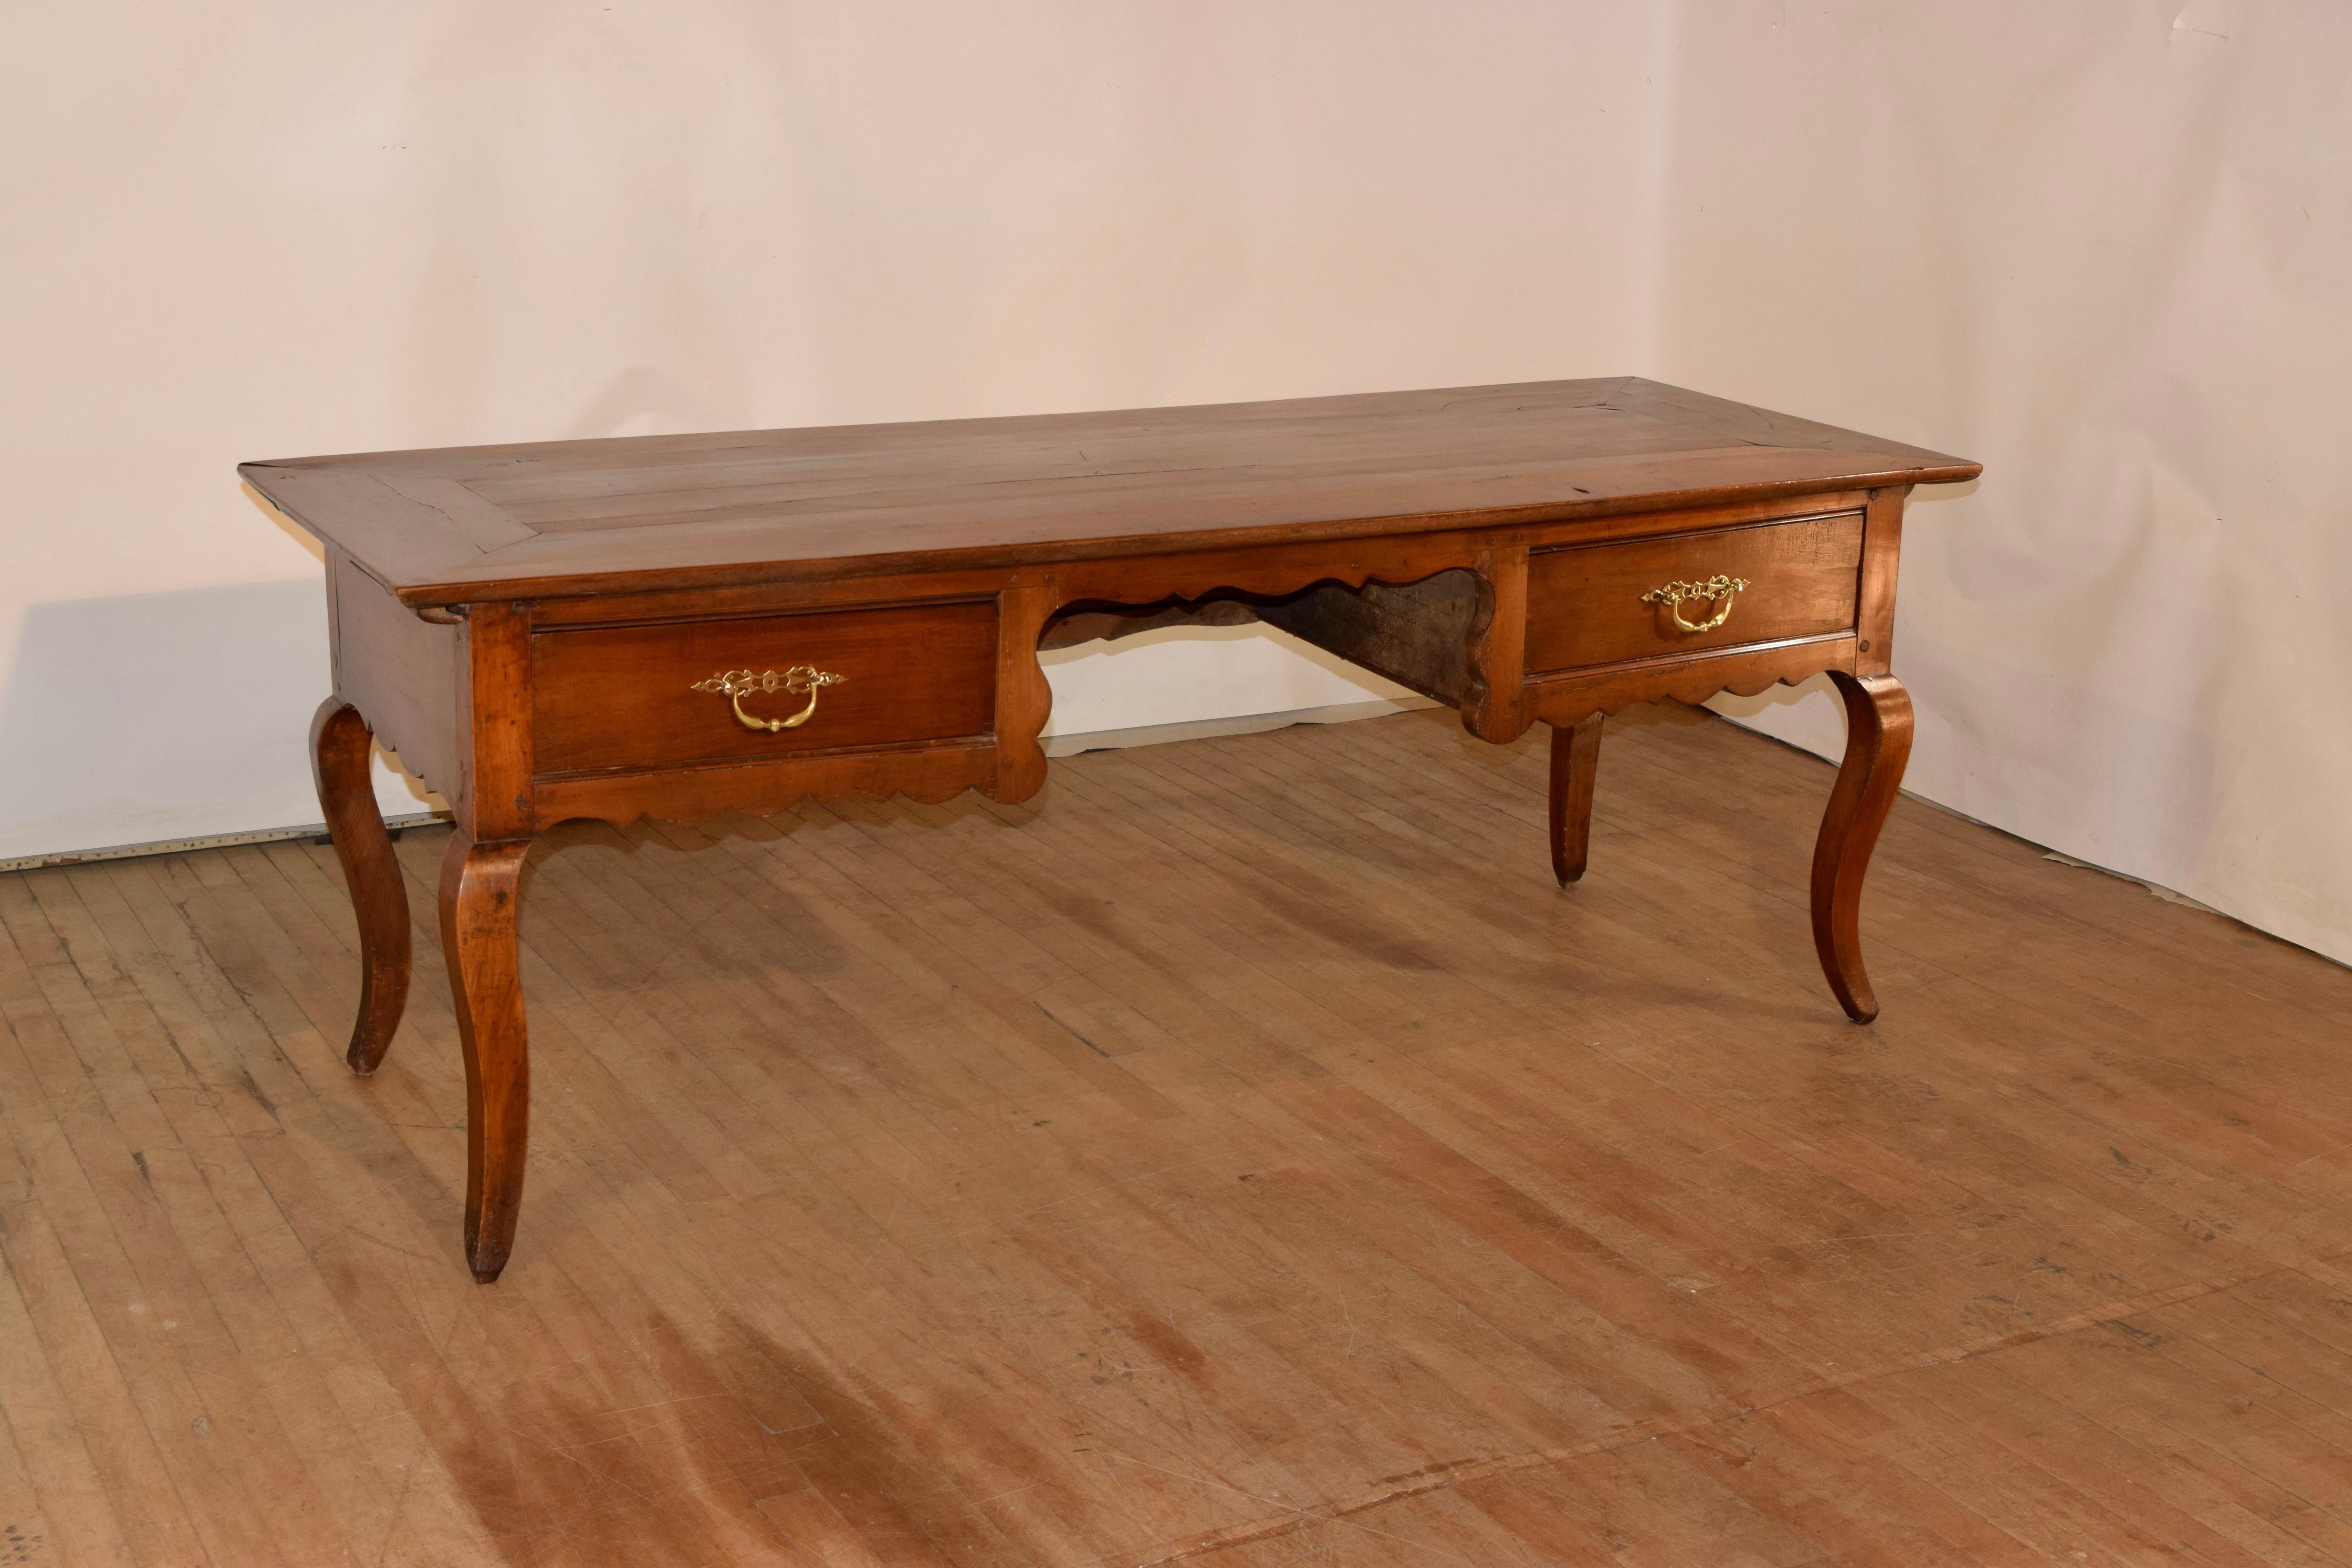 18th century fruitwood desk from France with a gorgeously banded top over simple and scalloped sides and two drawers in the front flanking a knee hole, which measures 26 inches in height to the apron of the desk. The back of the desk is hand paneled